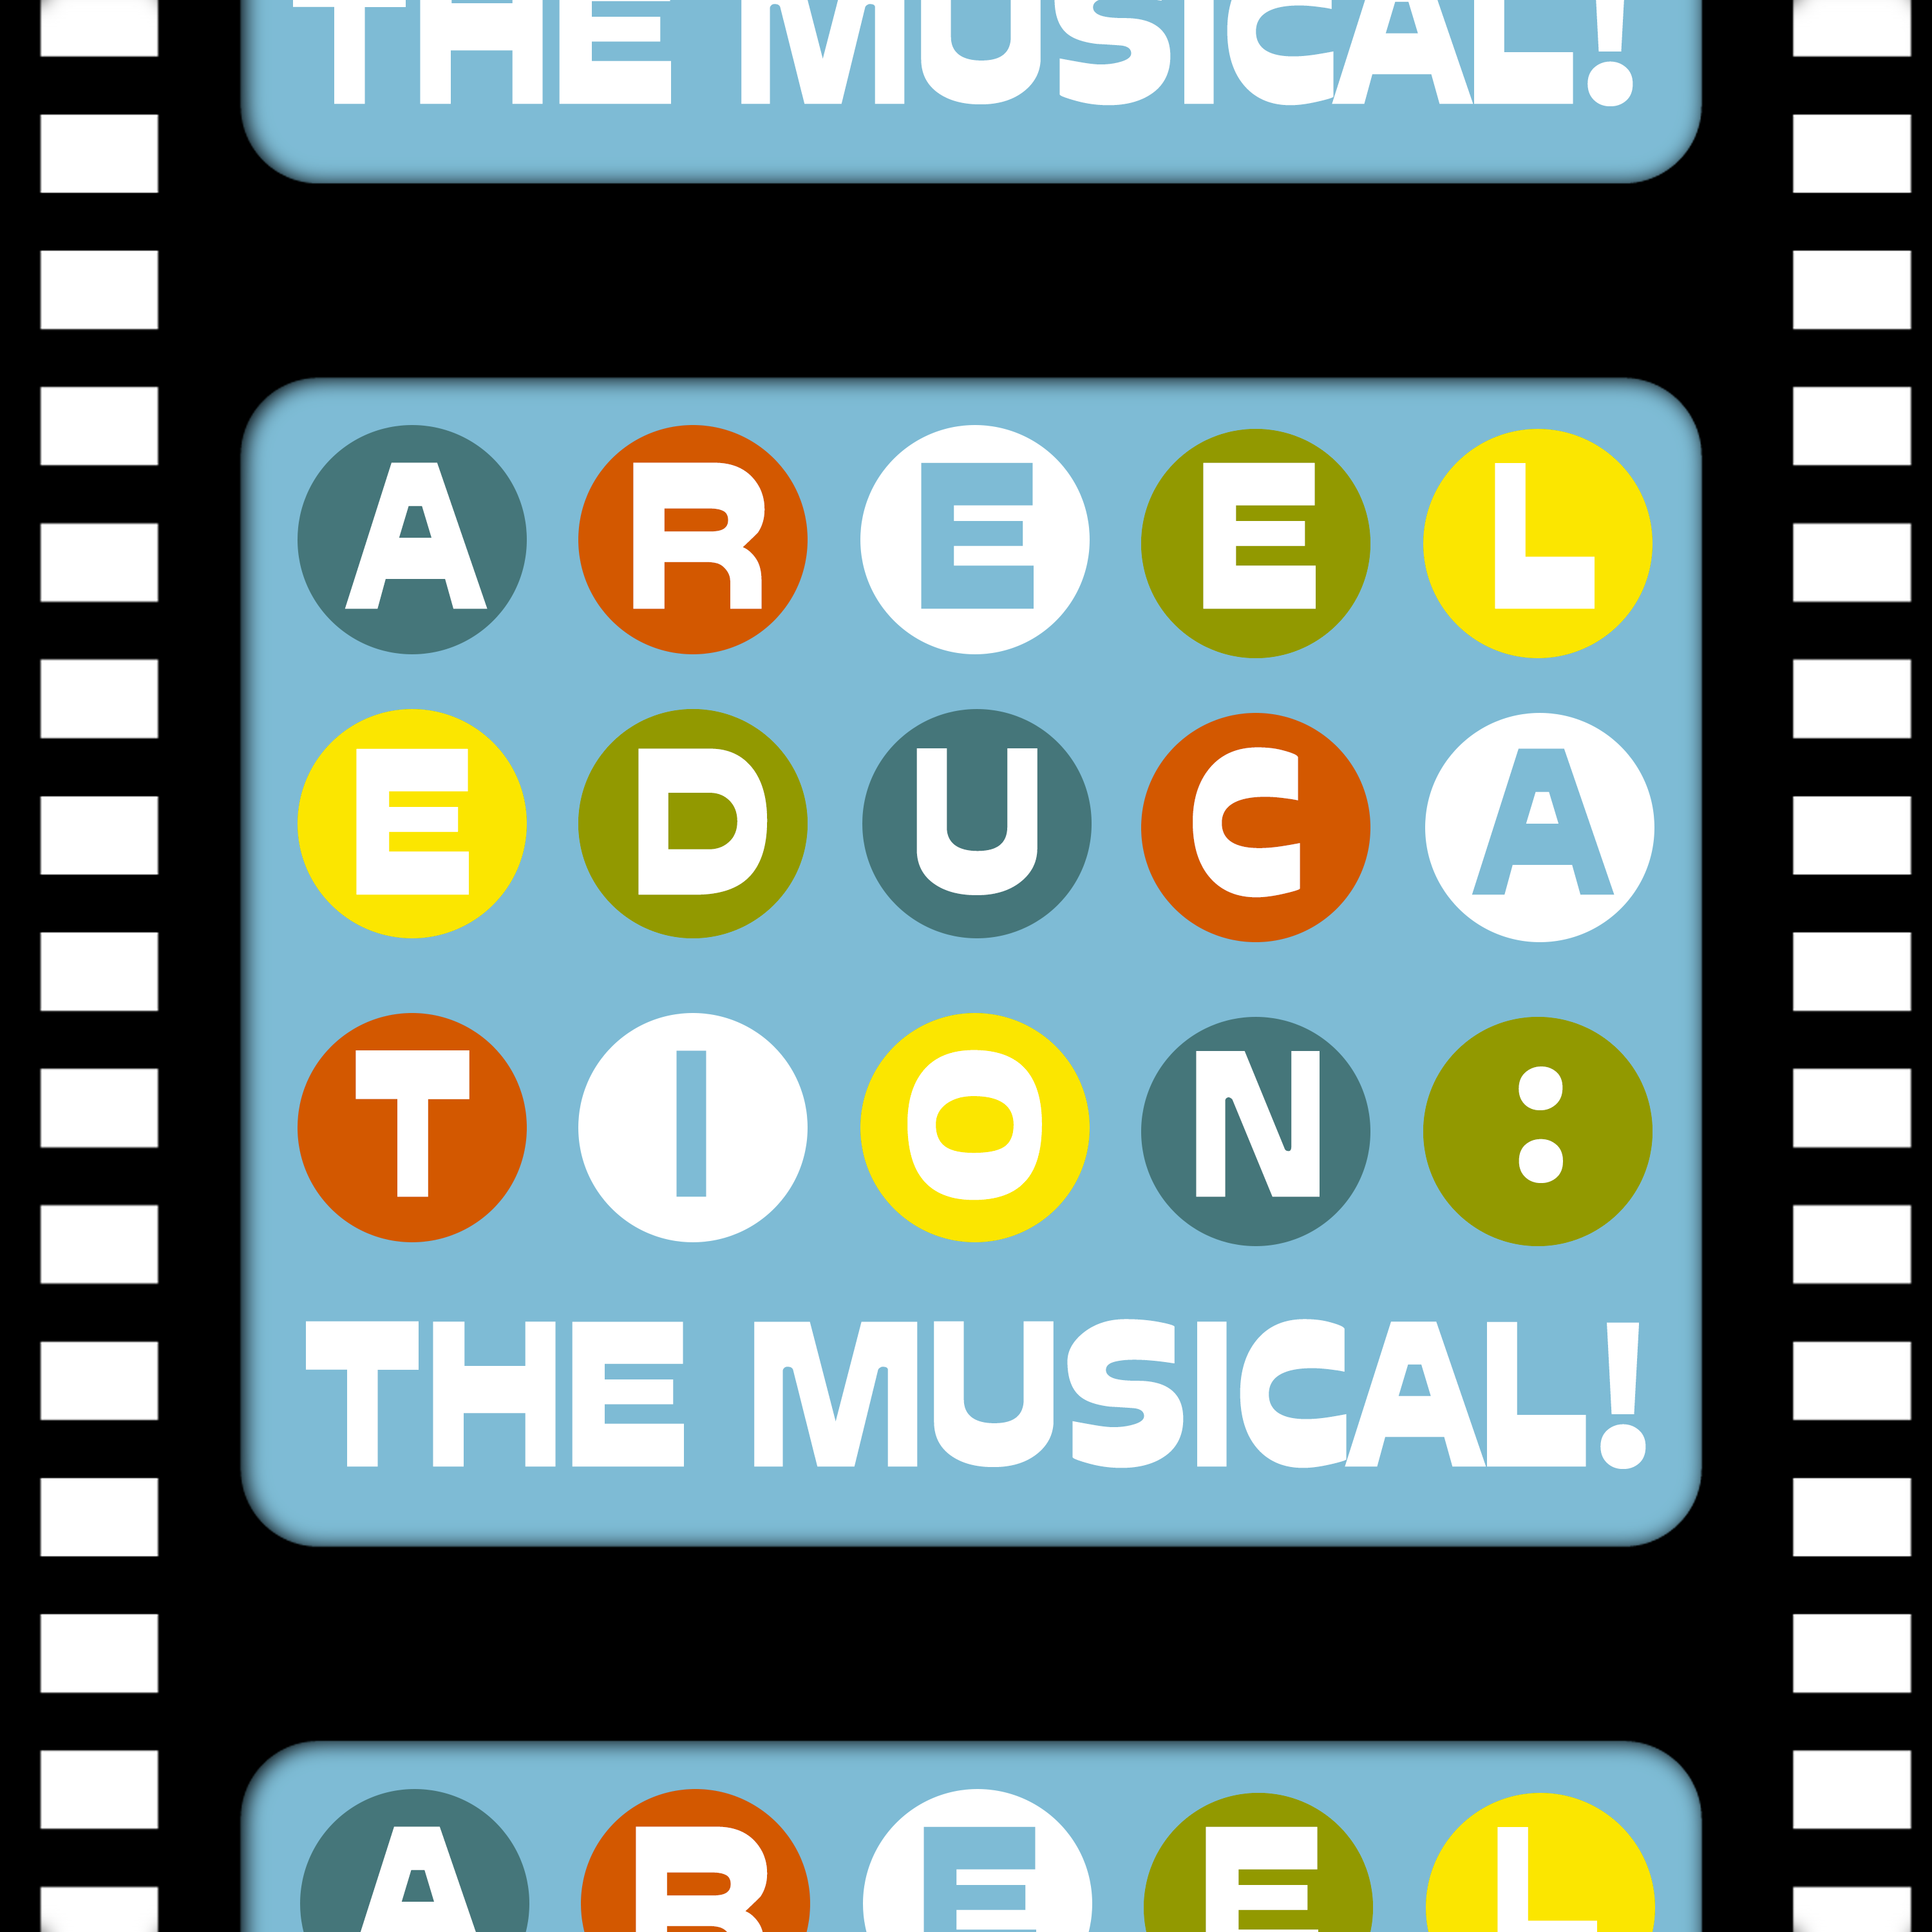 A Reel Education: The Musical!